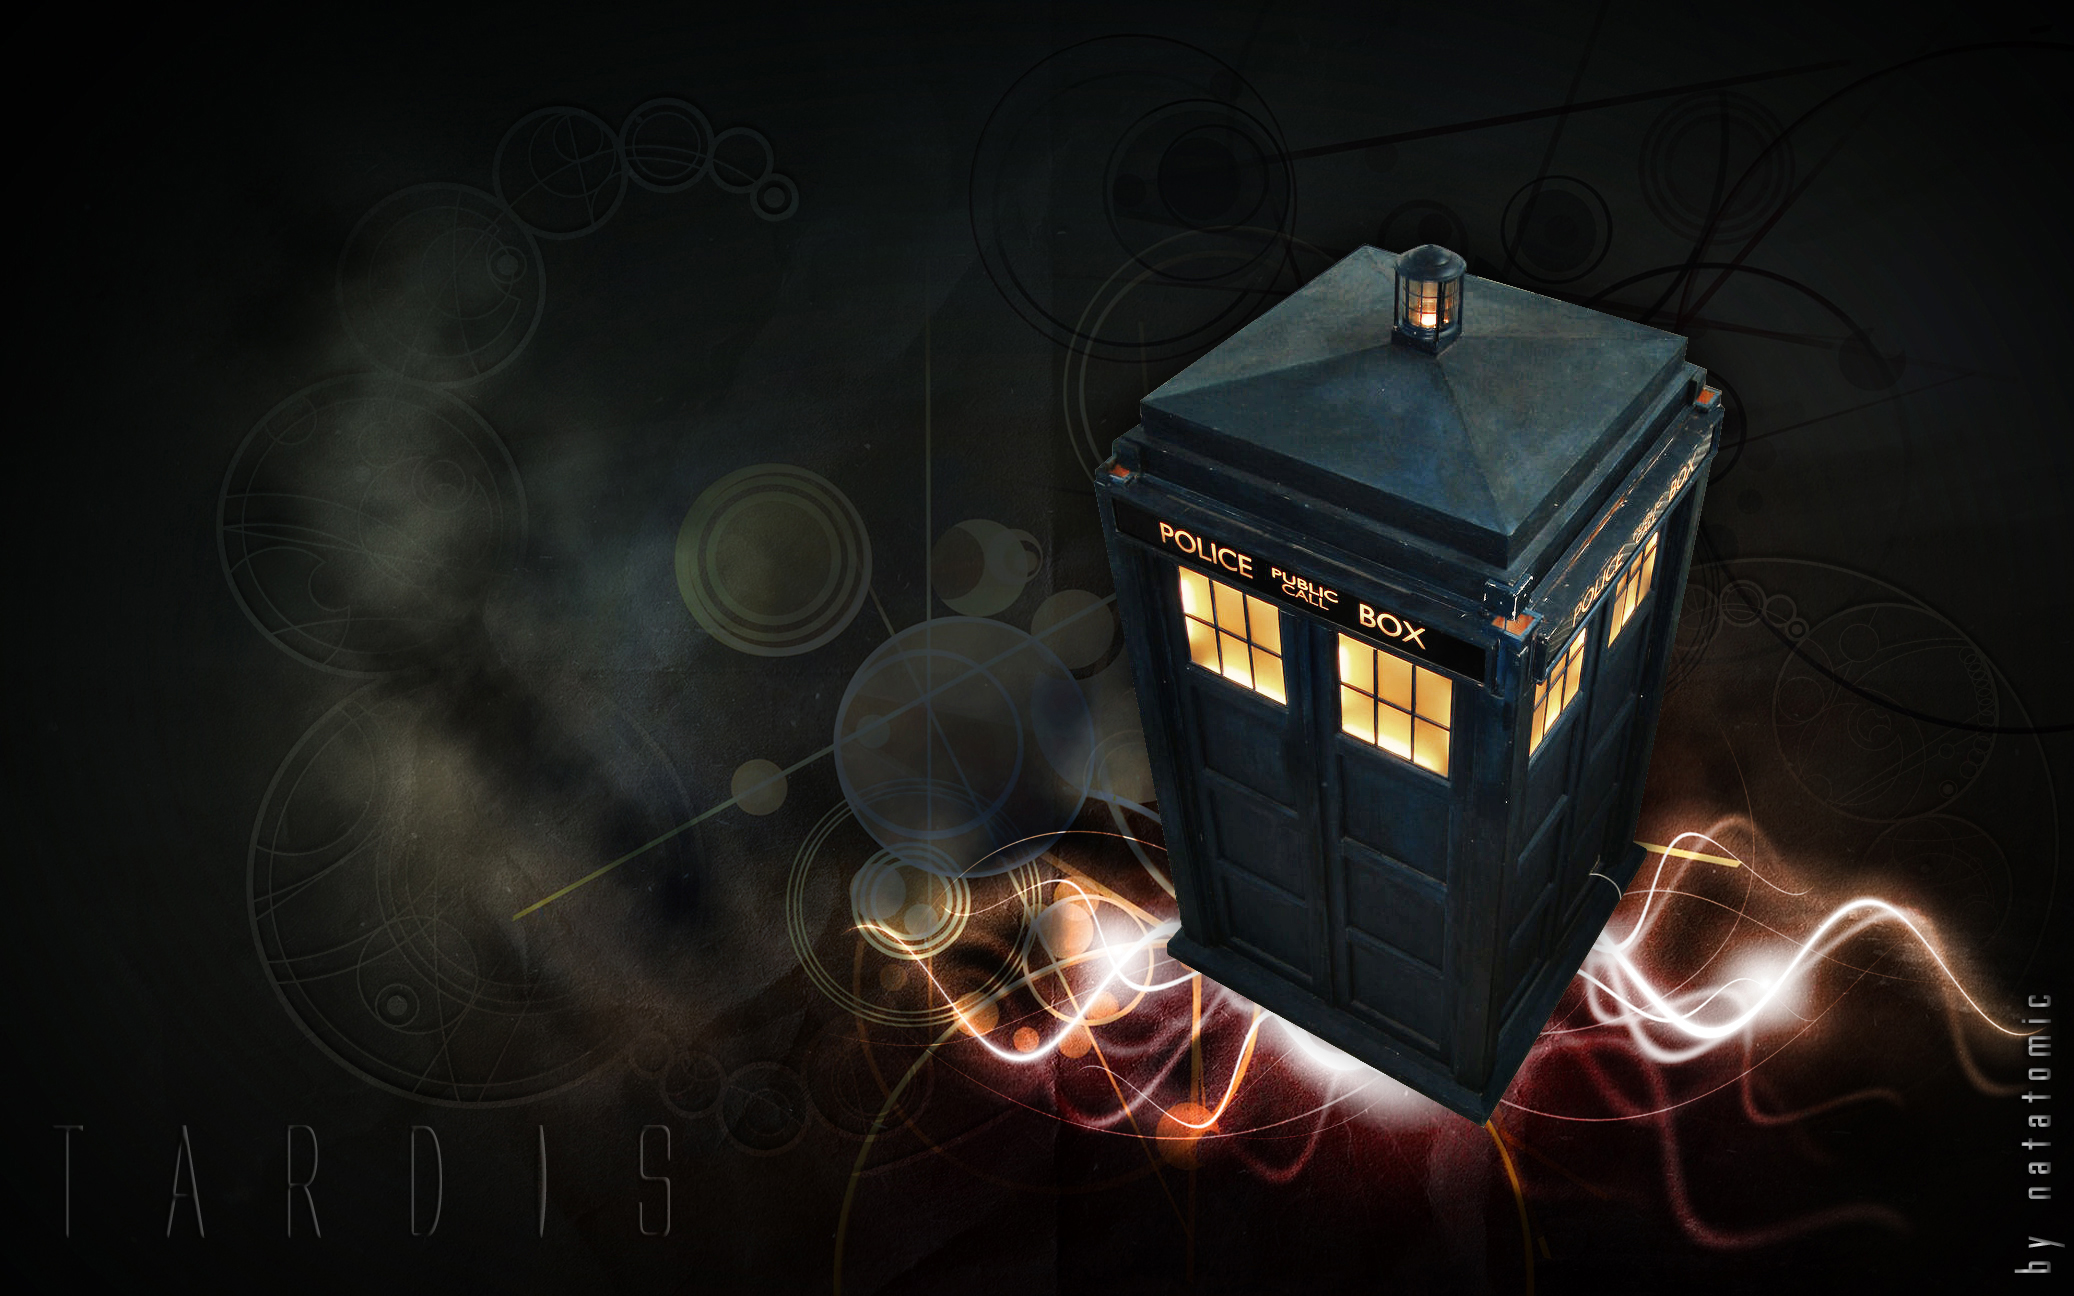  pictures tardis doctor who desktop funny wallpaper Car Pictures 2074x1296